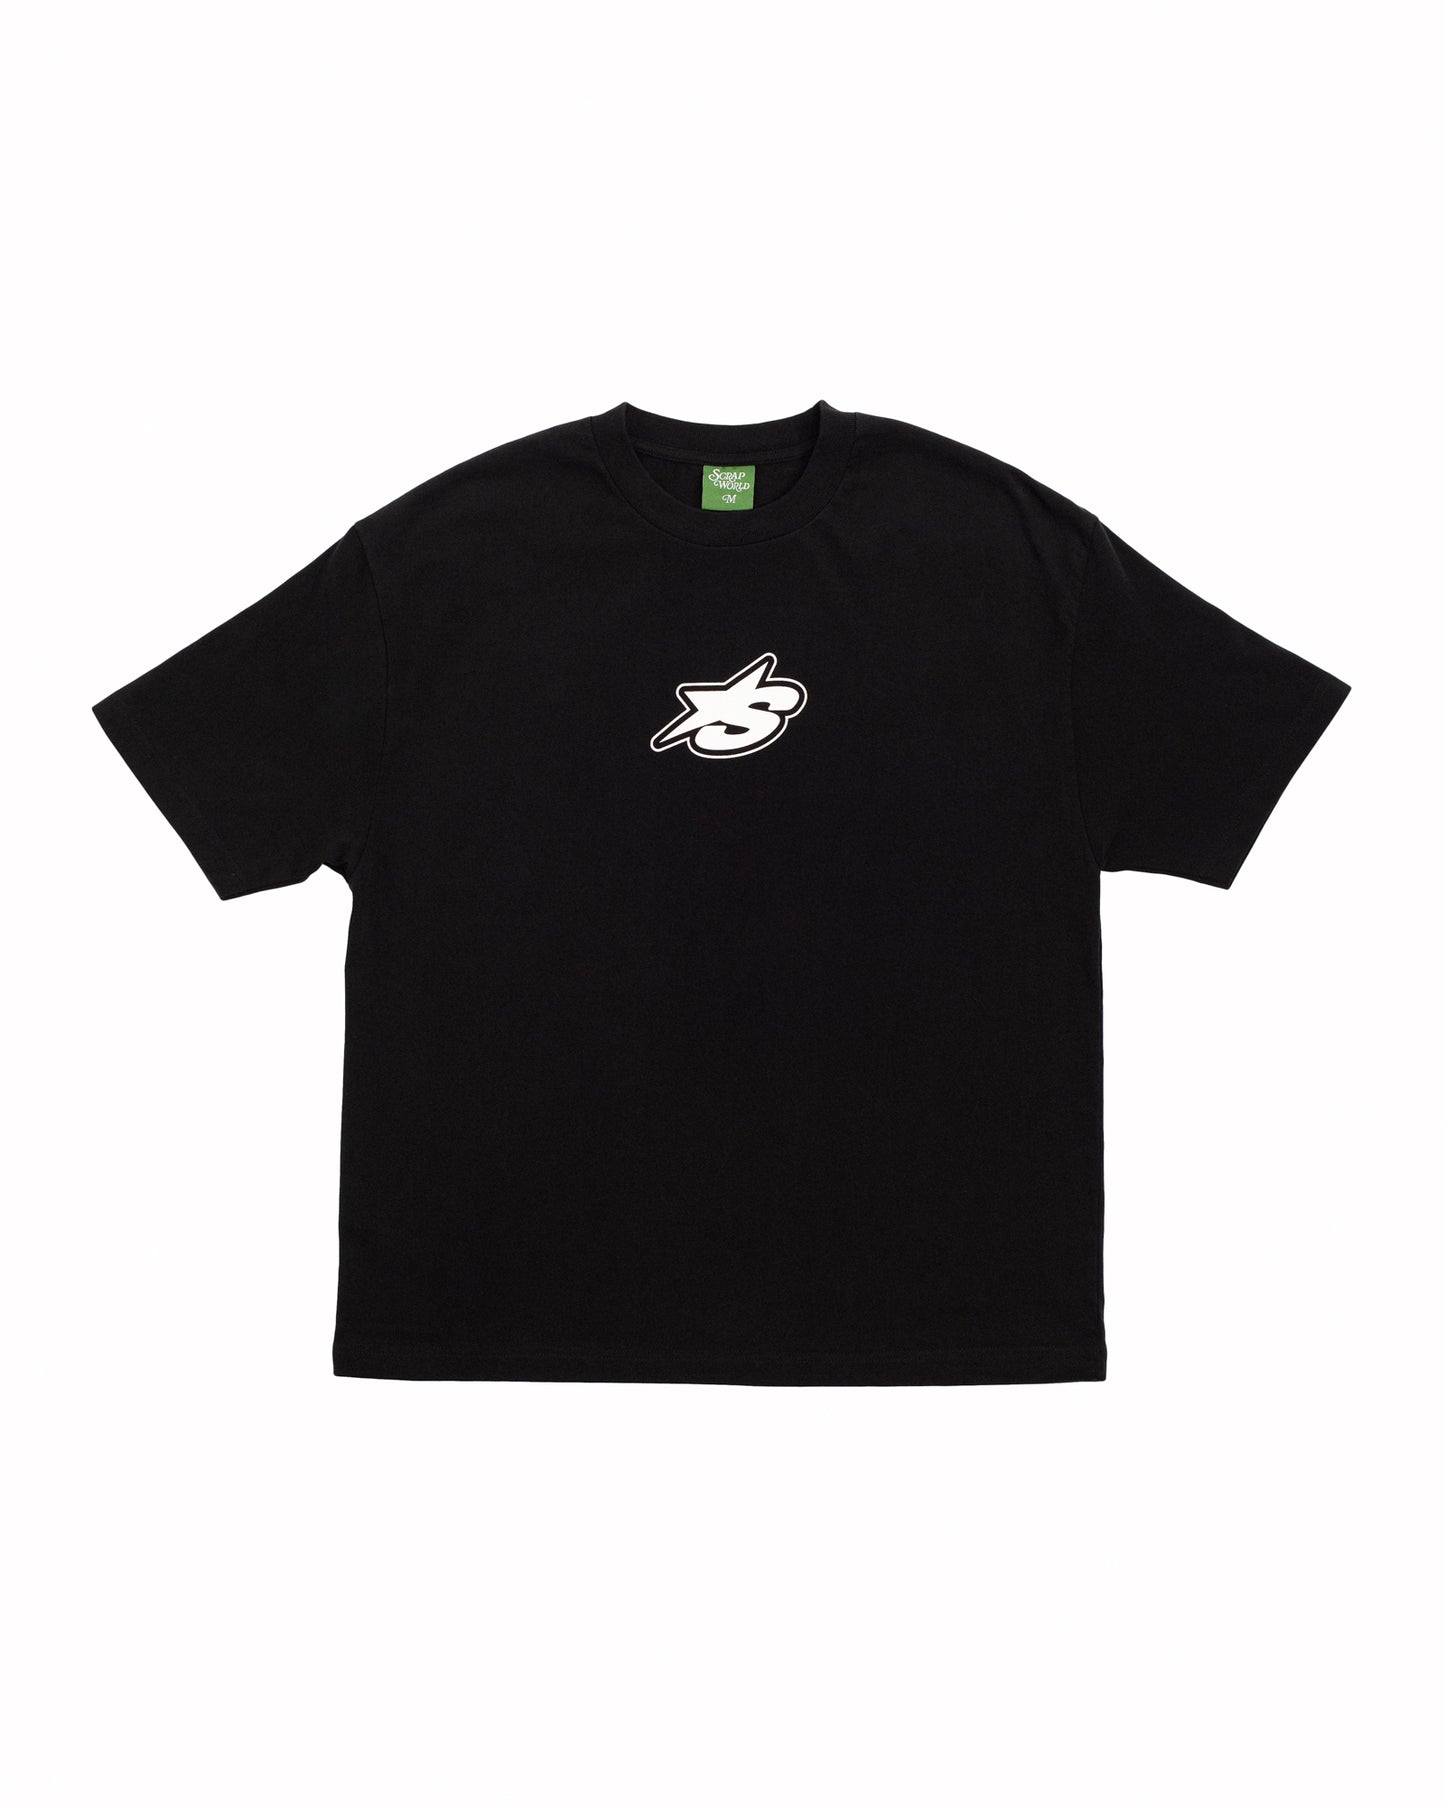 BY US FOR US BLACK TEE